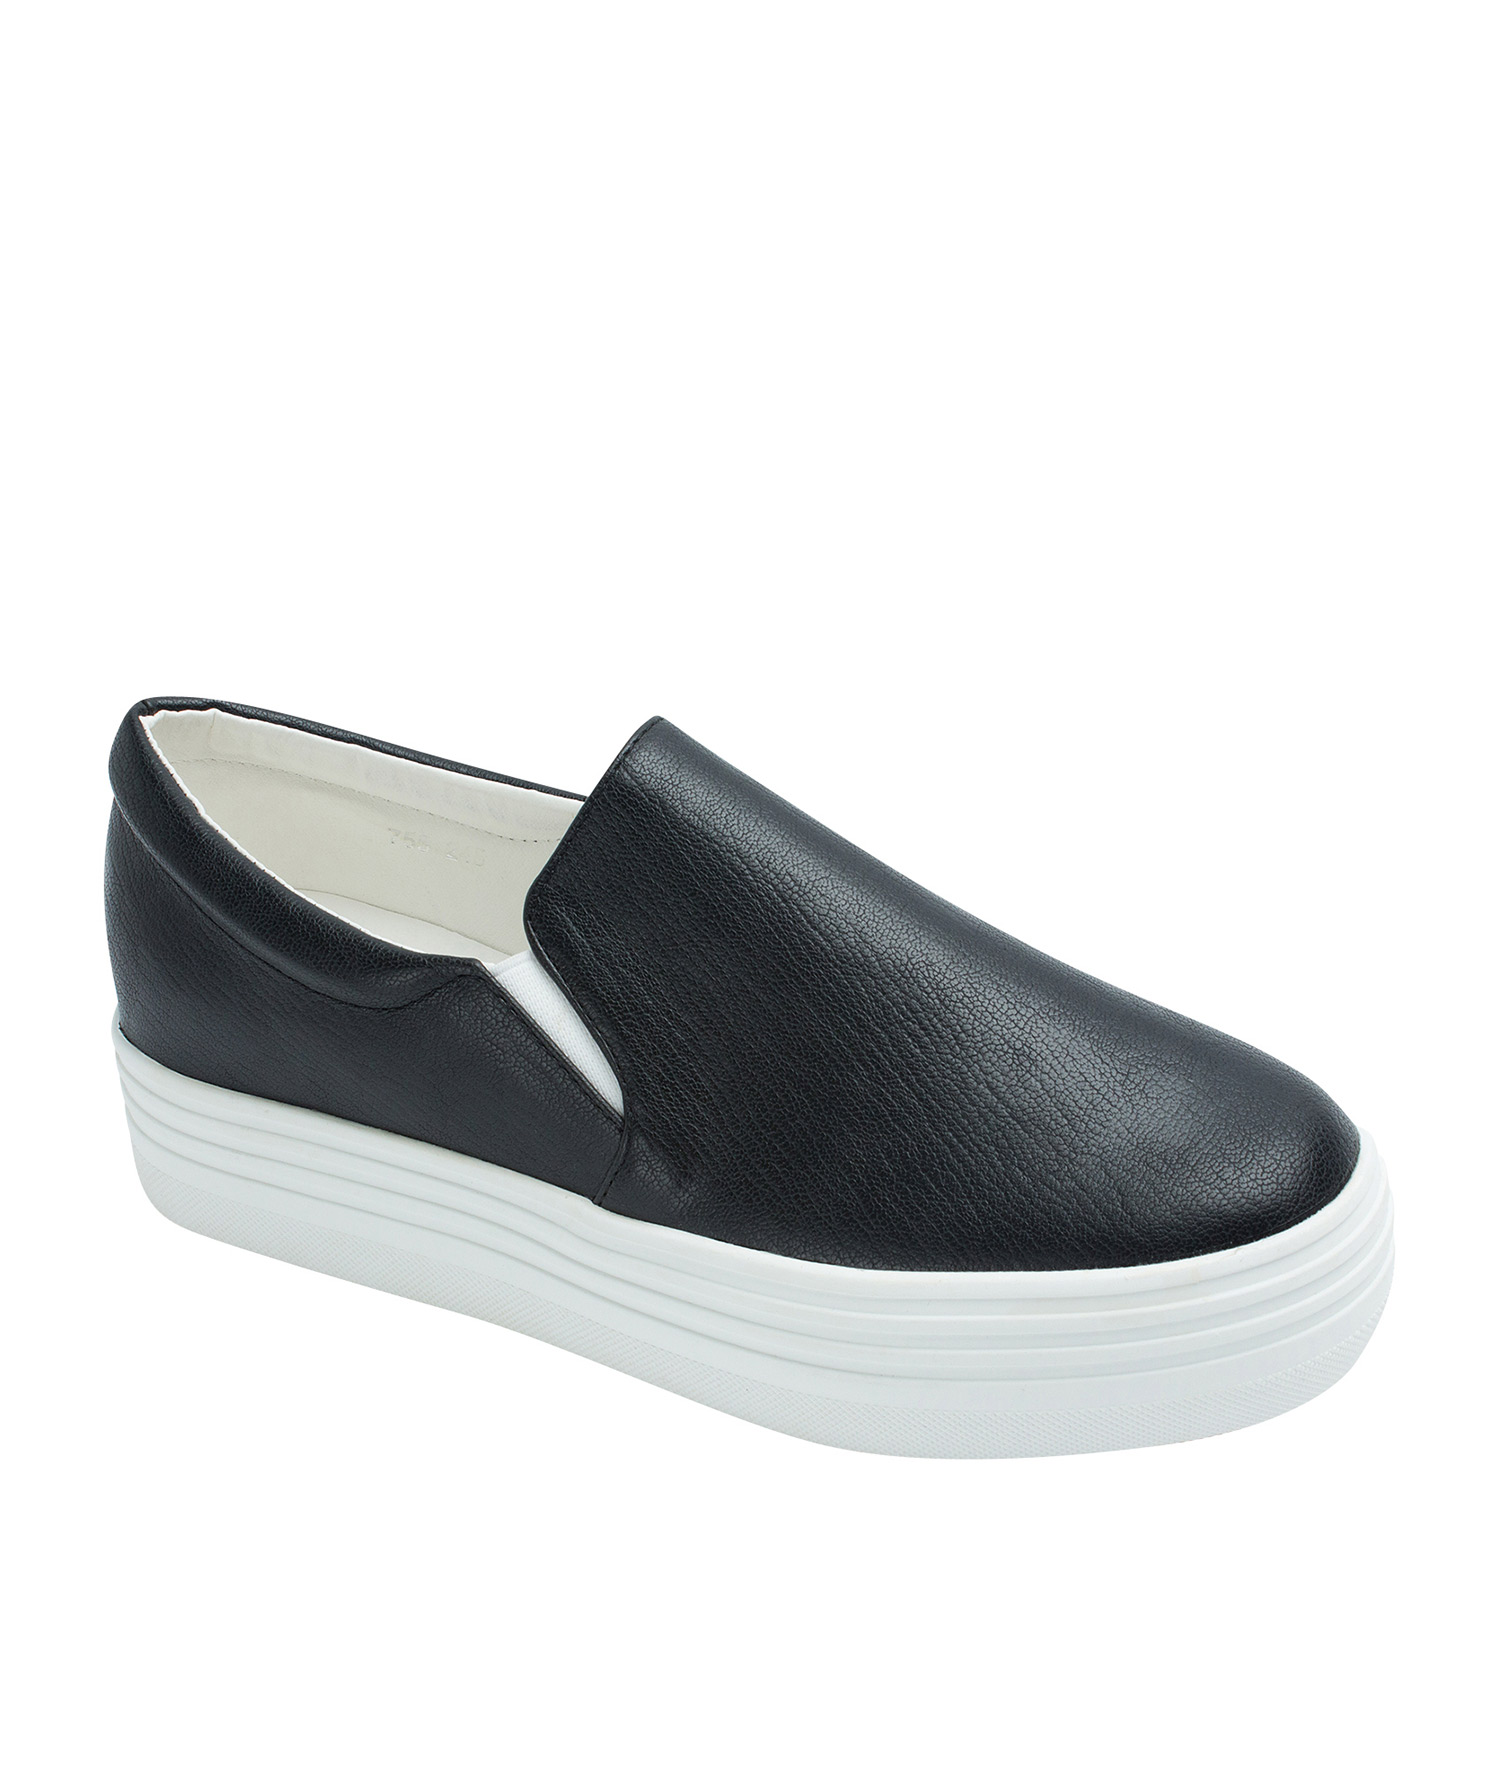 AnnaKastle New Womens Faux Leather Solid Slip-On Sneaker US 5 6 7 8 